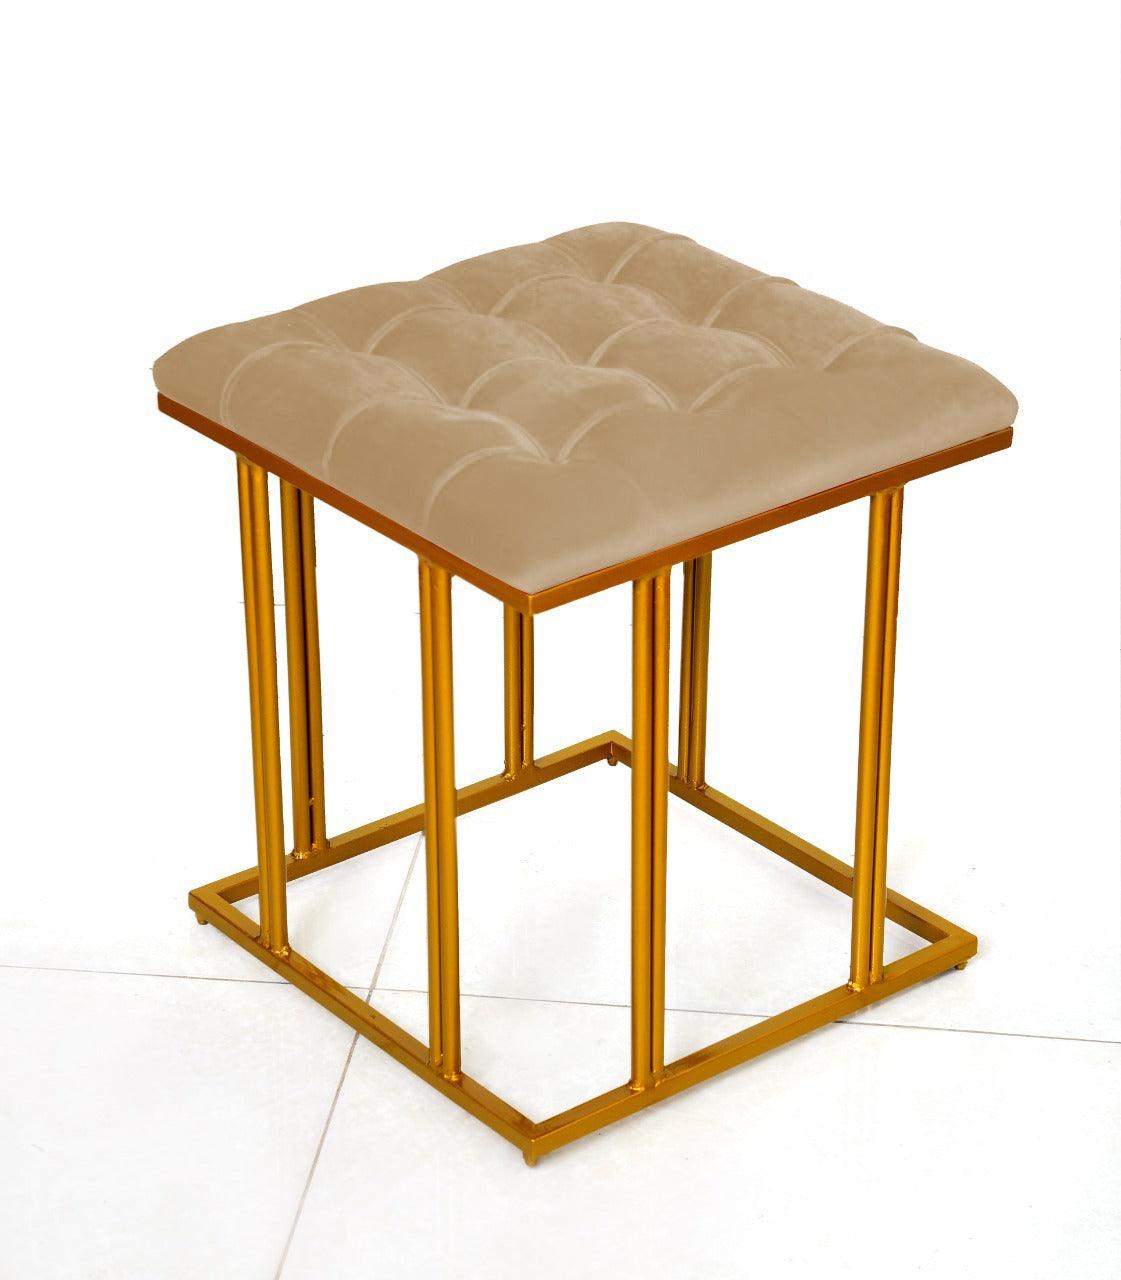 Luxury Velvet Square Stool With Steel Stand -908 - 92Bedding